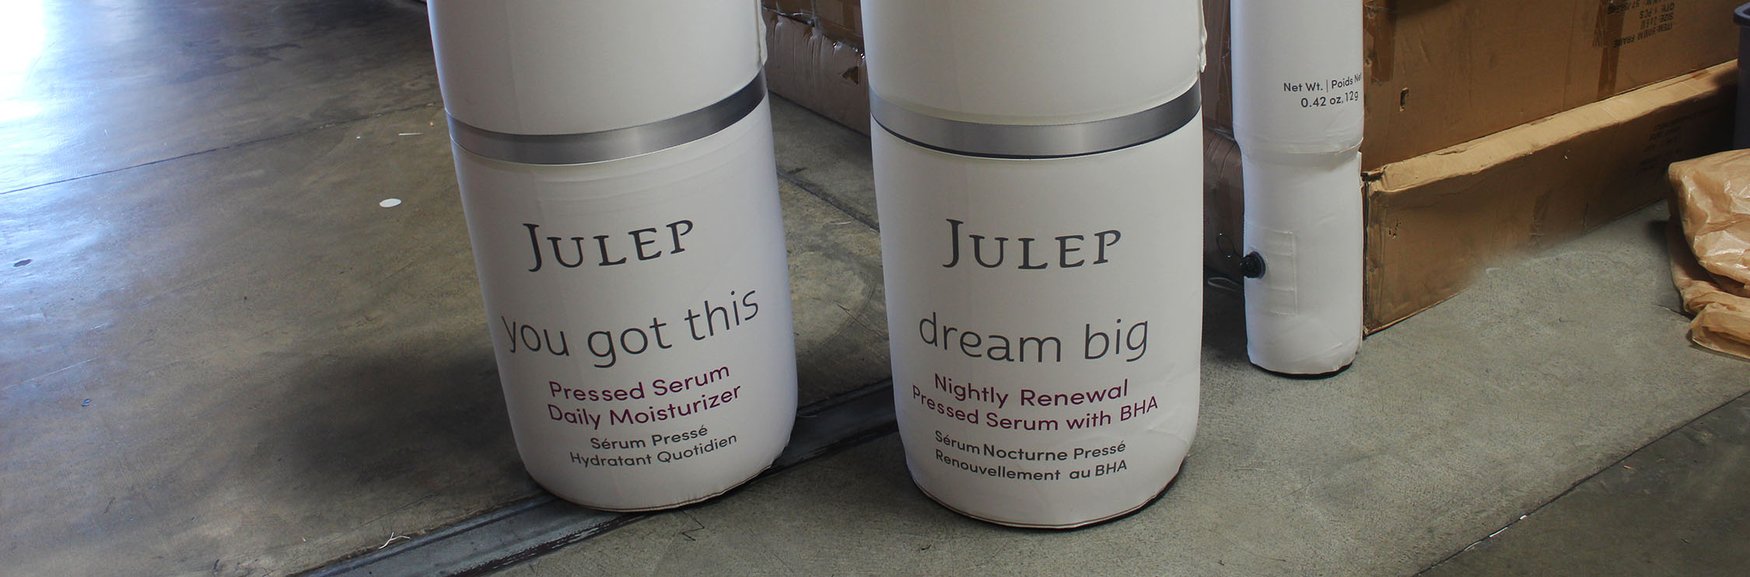 julep-beauty-replicas-inflatables